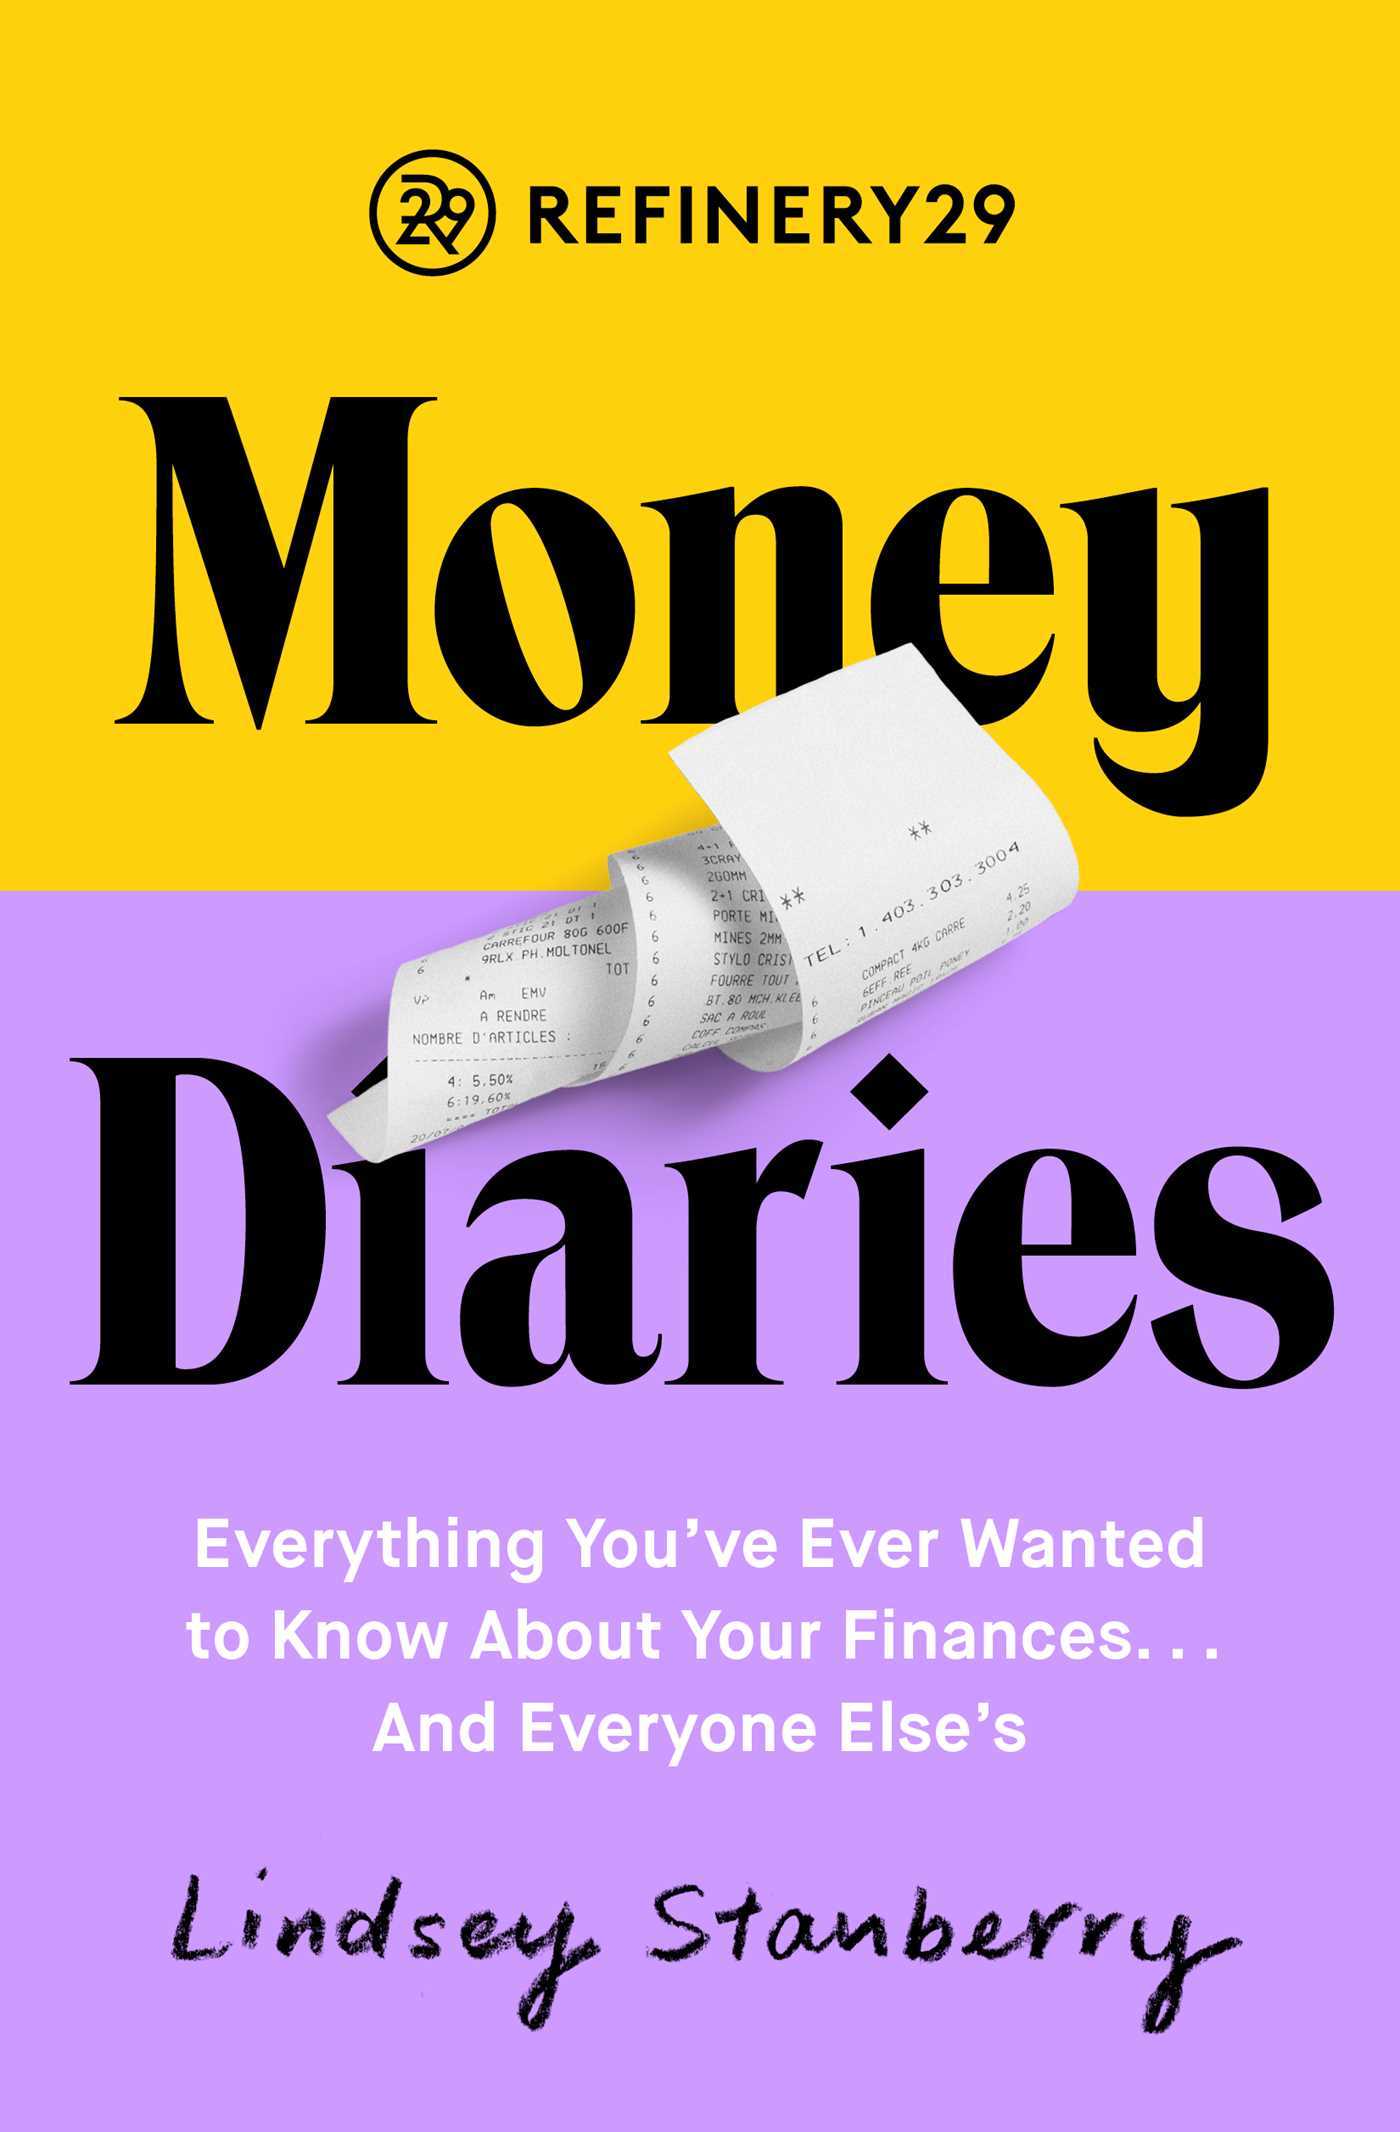 Refinery29 Money Diaries by Lindsey Stanberry Free Download